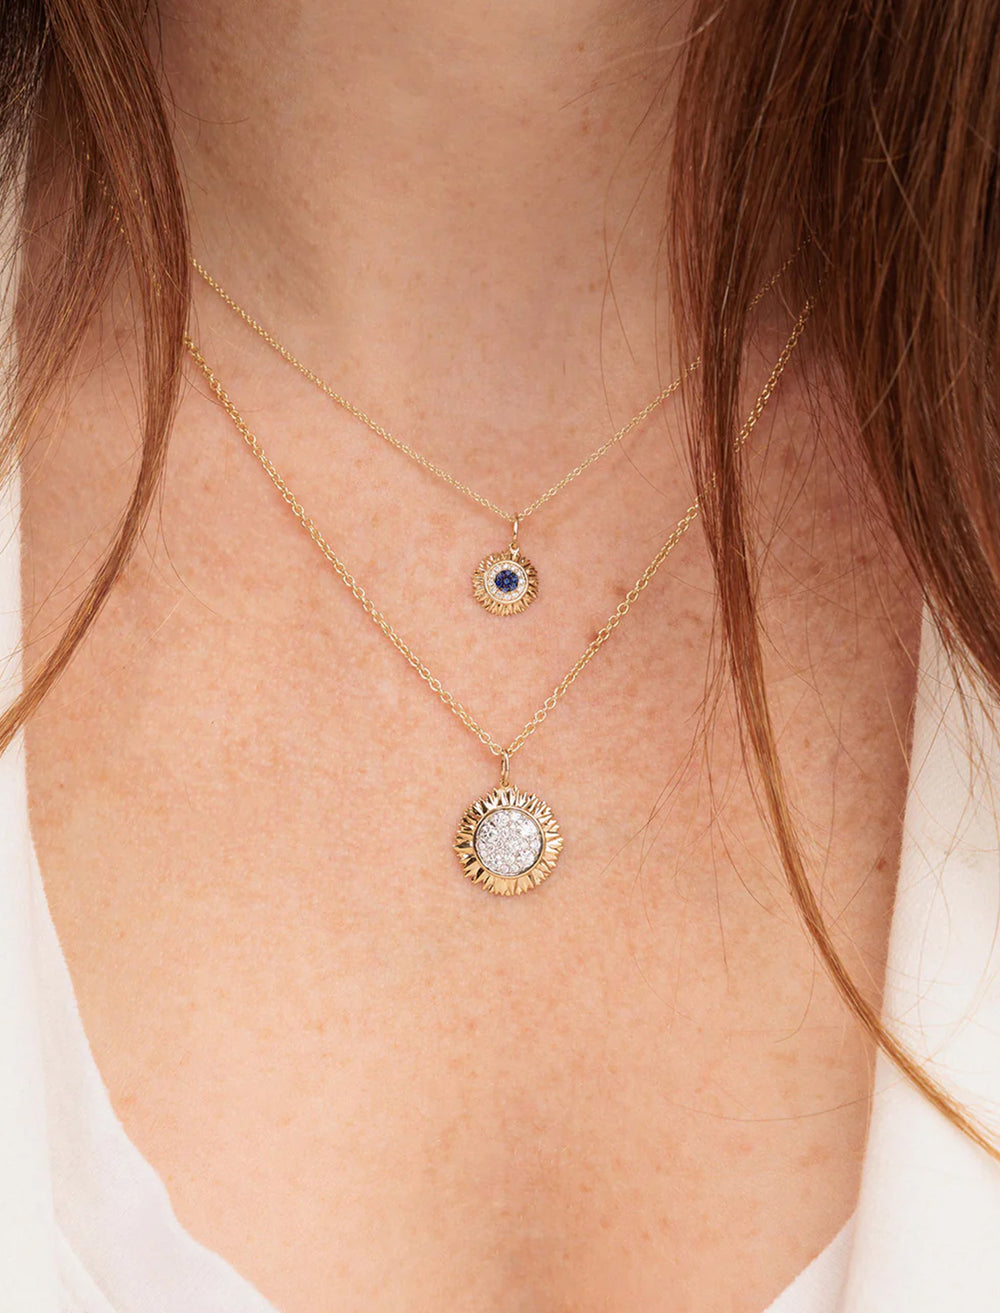 Model wearing Sydney Evan's pave sunflower charm necklace with sapphire and diamond.